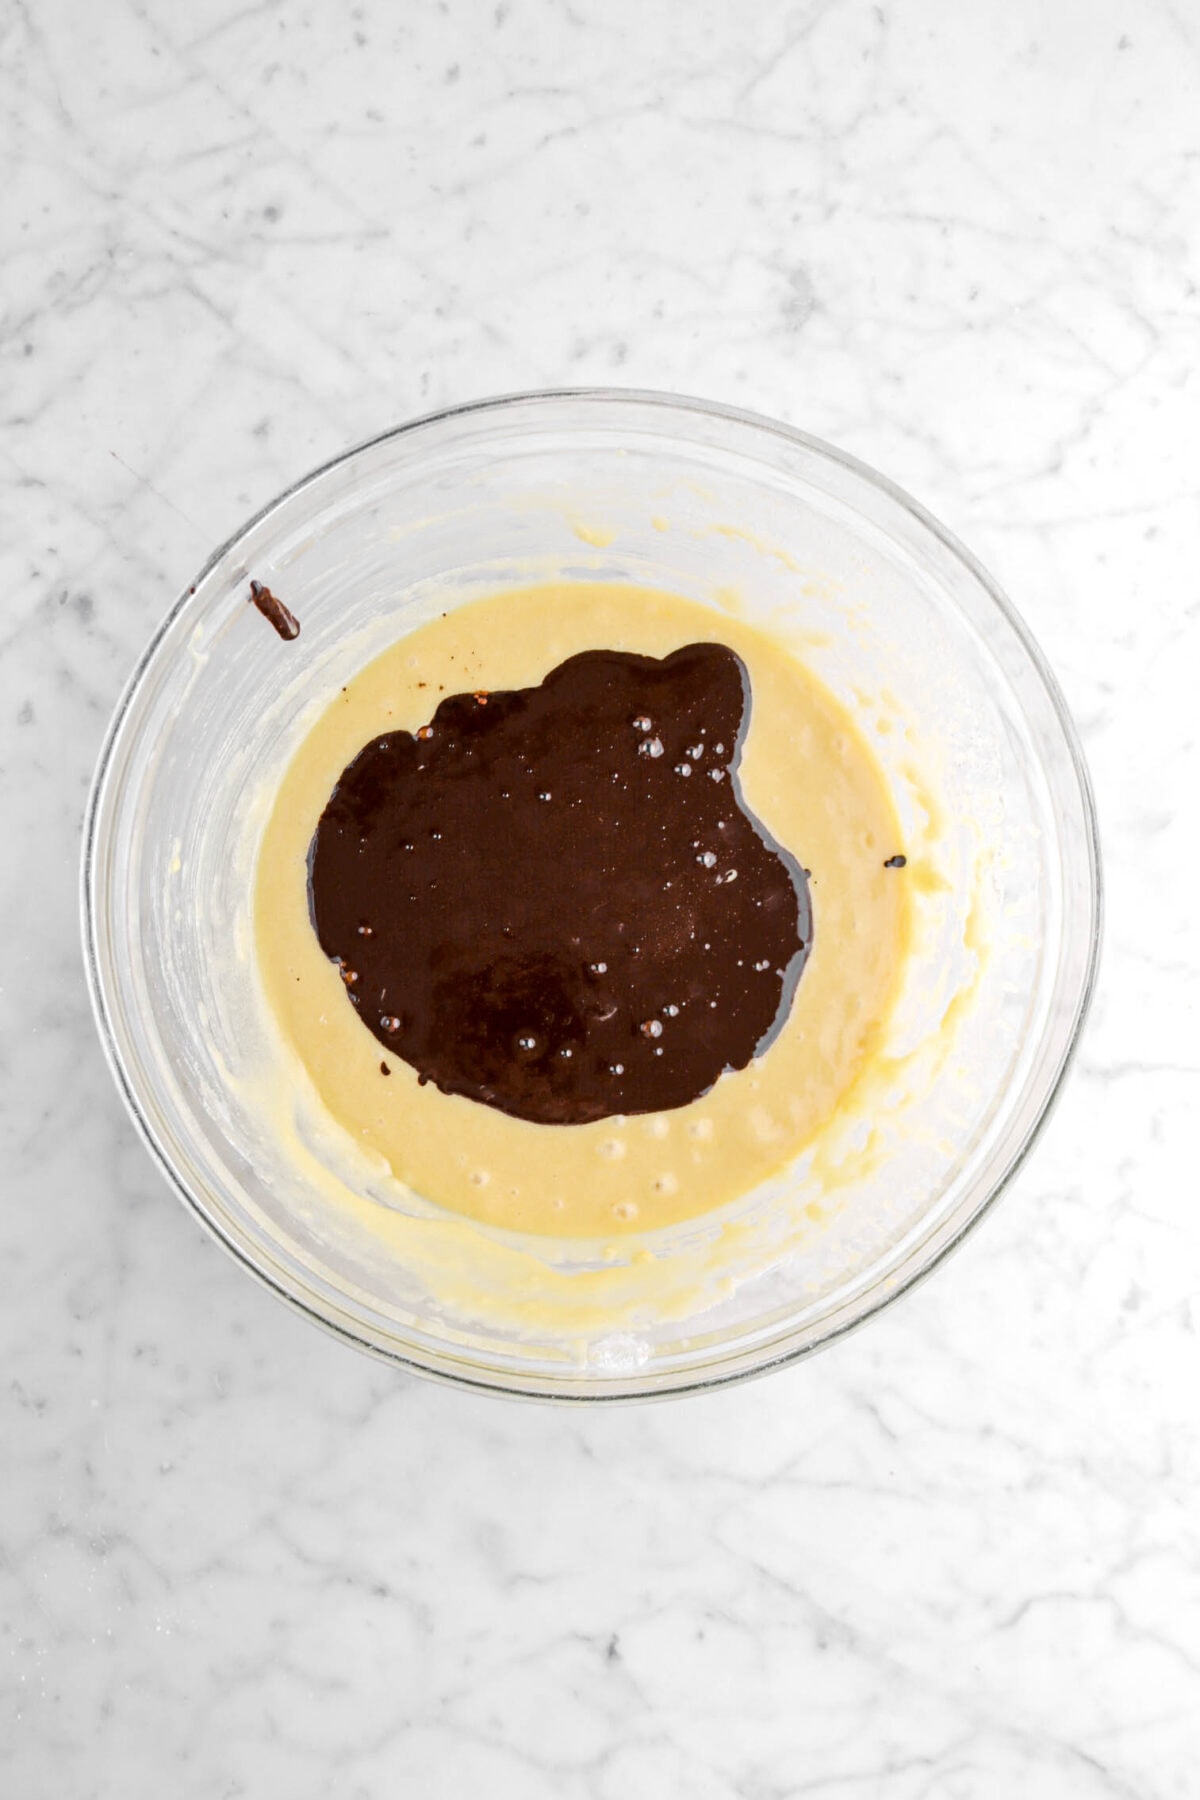 bloomed chocolate added to cake batter